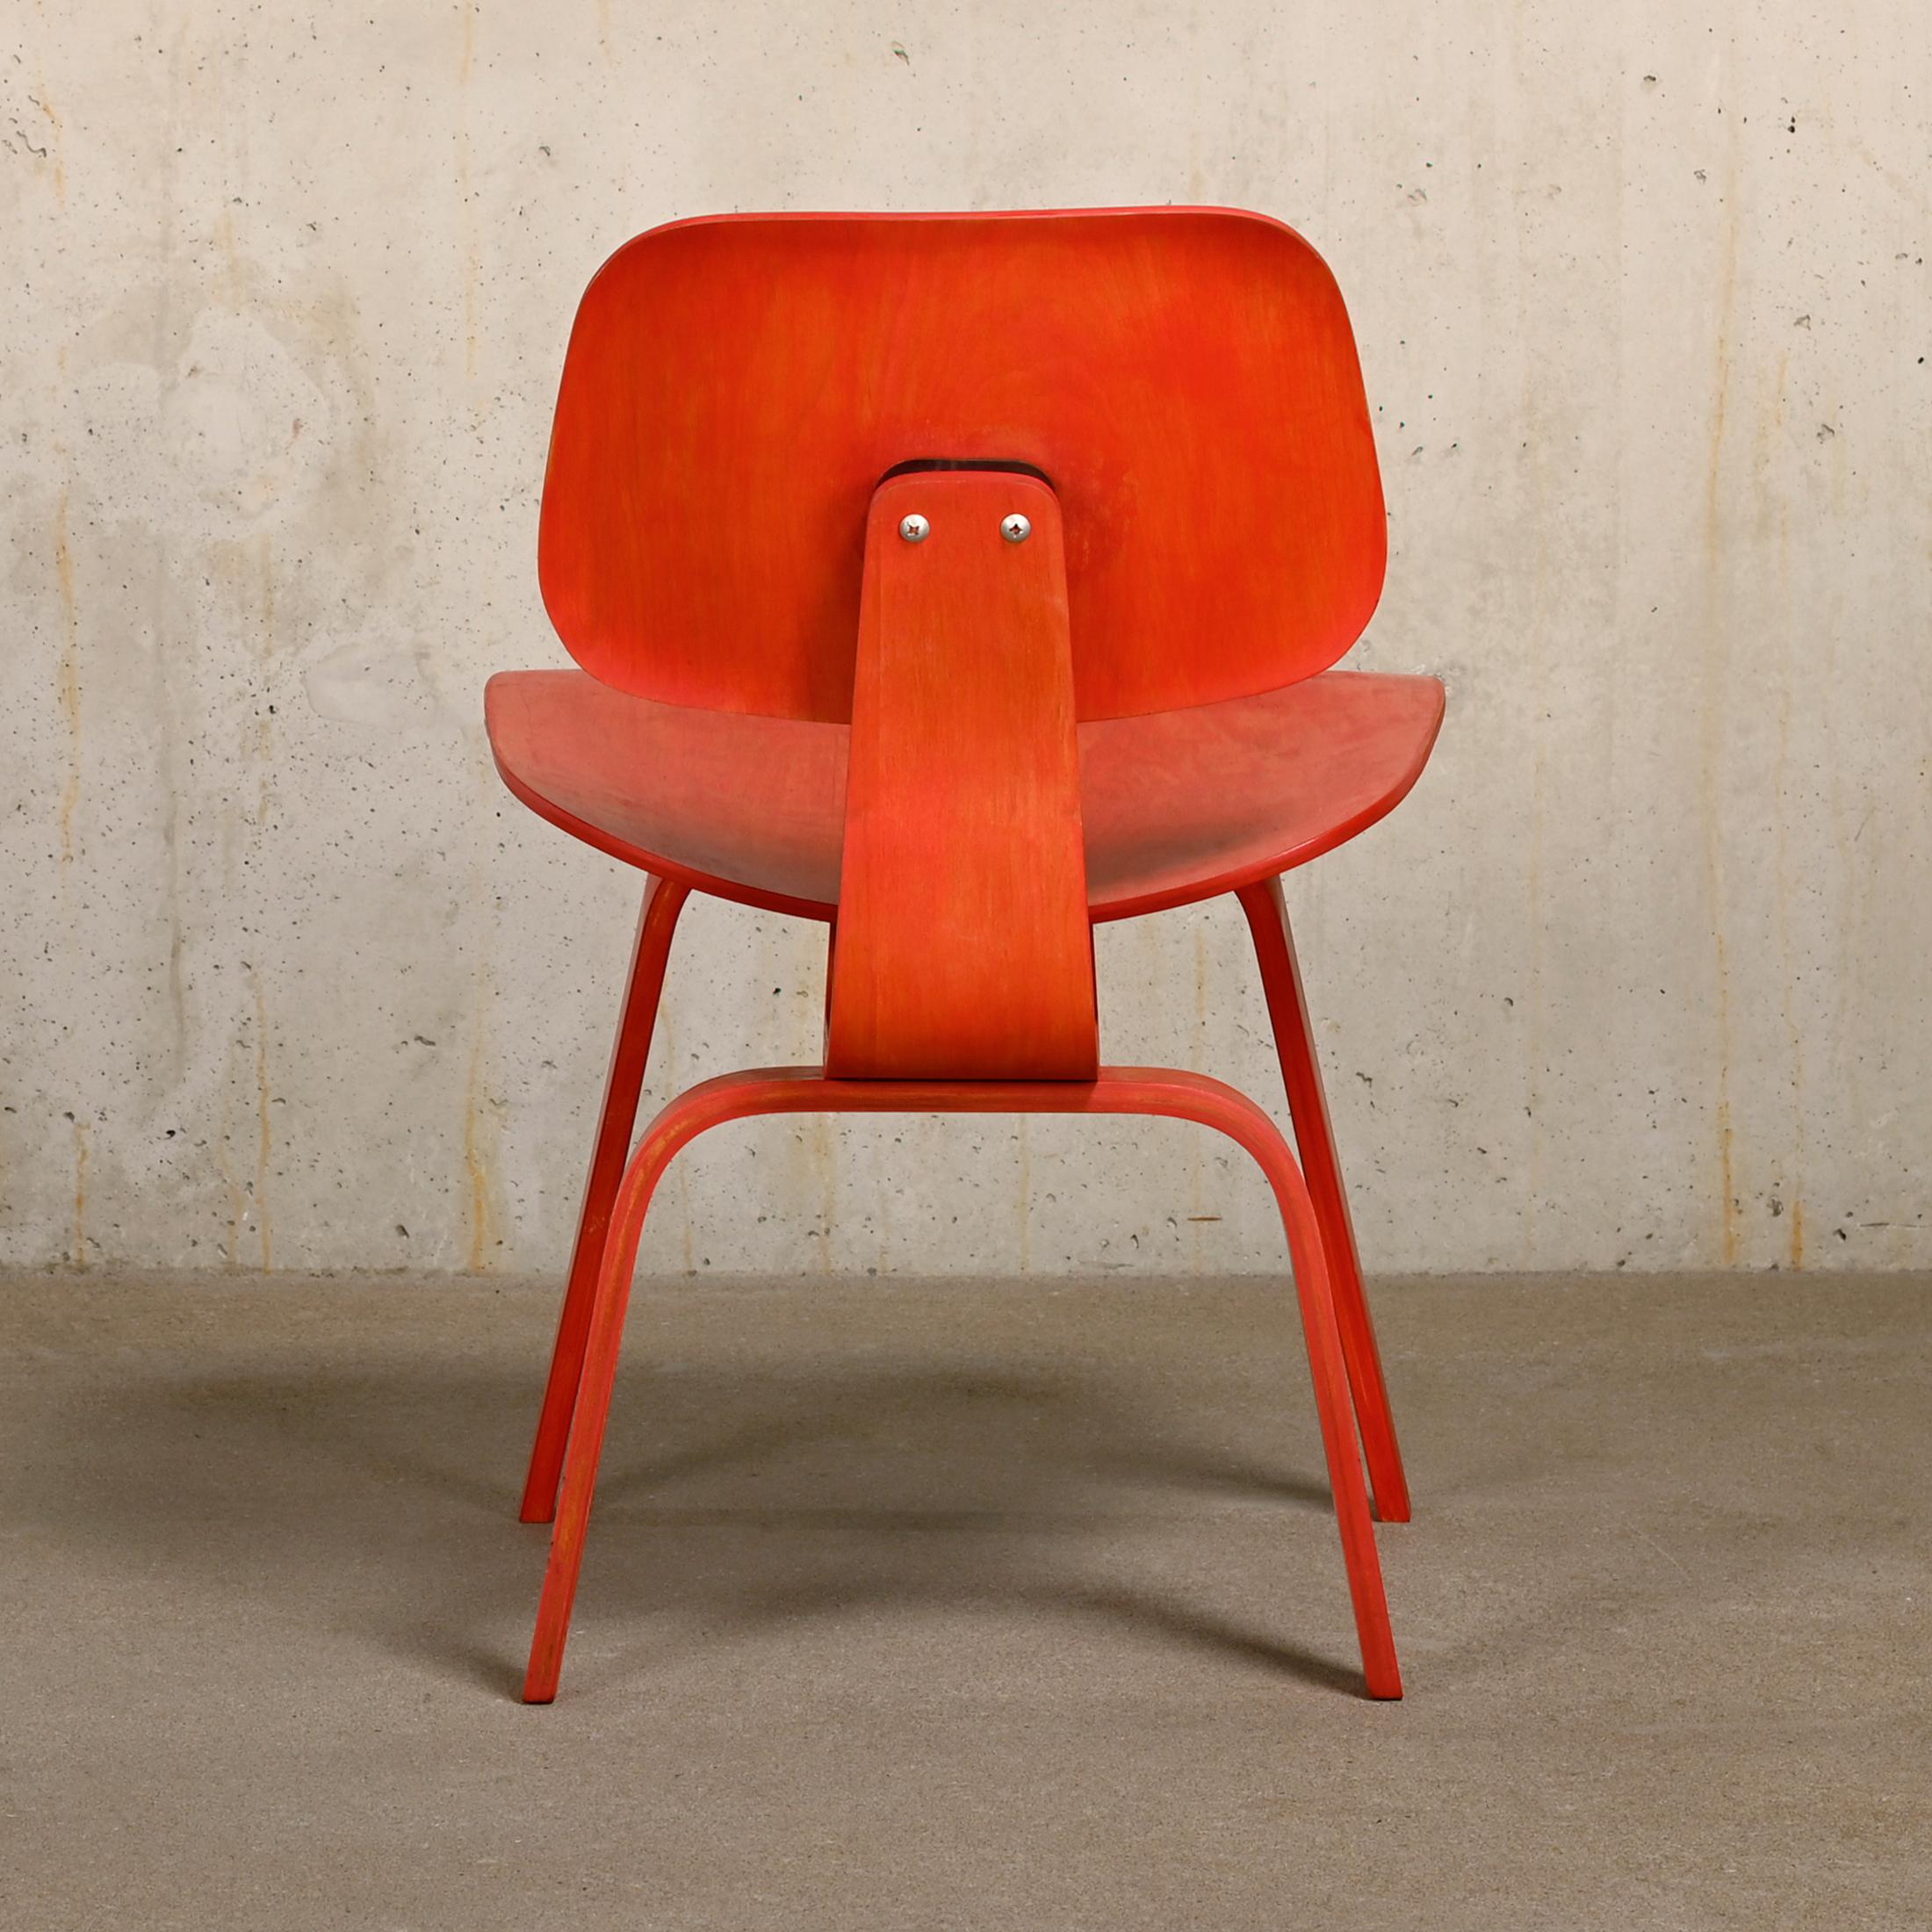 Molded Charles & Ray Eames Early DCW Red aniline dye Ash Dining Chair for Evans Plywood